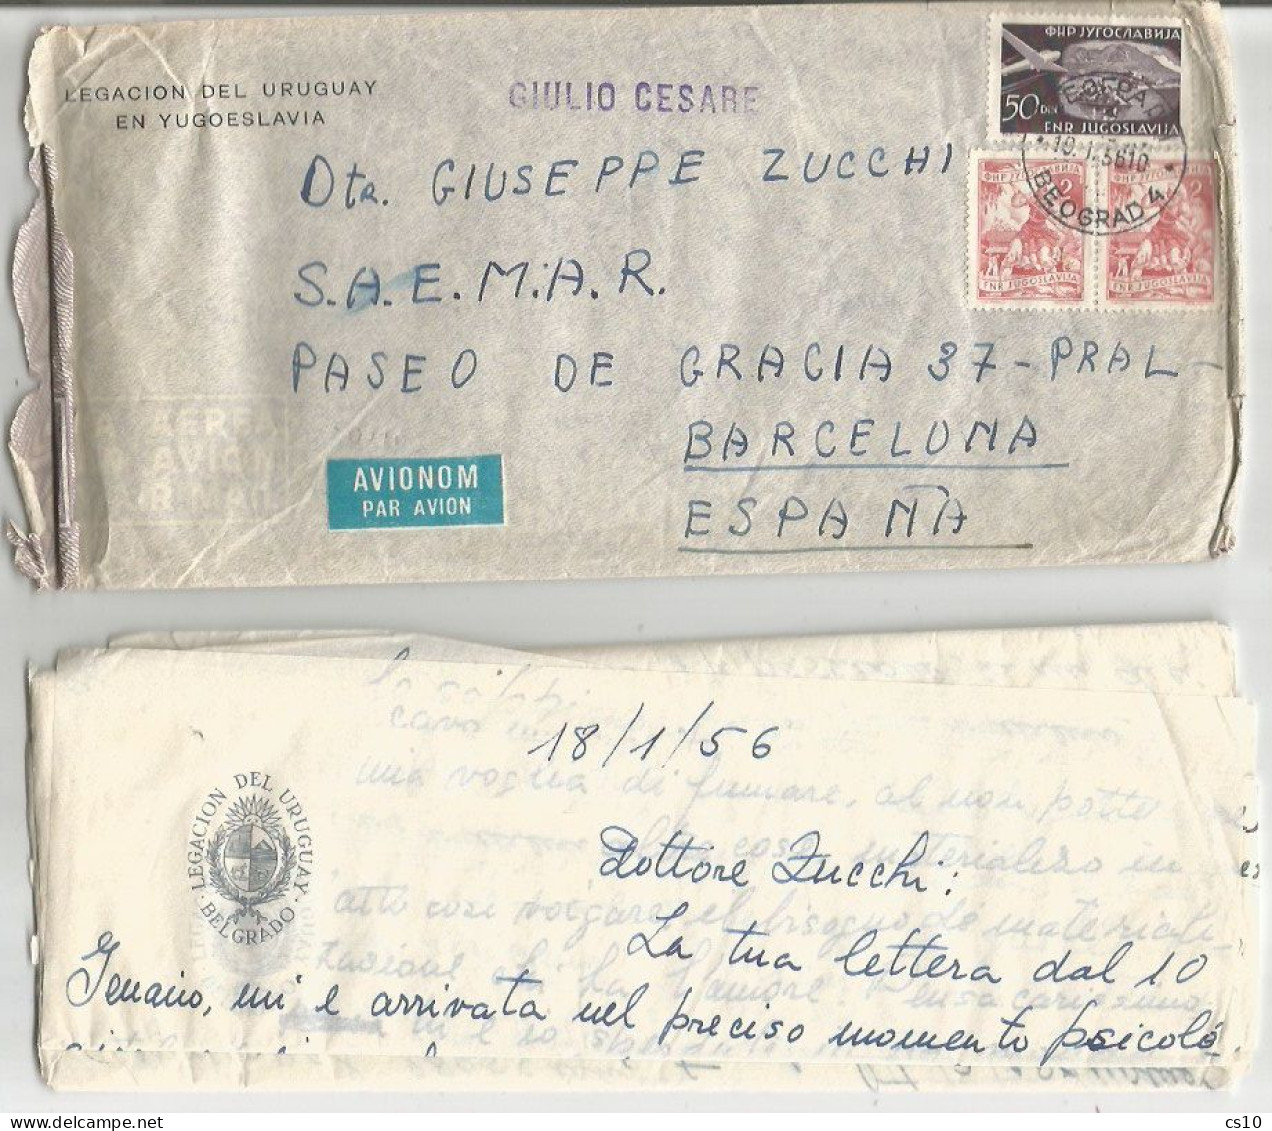 Jugoslavija Legation Uruguay AirmailCV Beograd 19jan1956 X Spain To S/S "Giulio Cesare" With Content (6pages) - Luchtpost